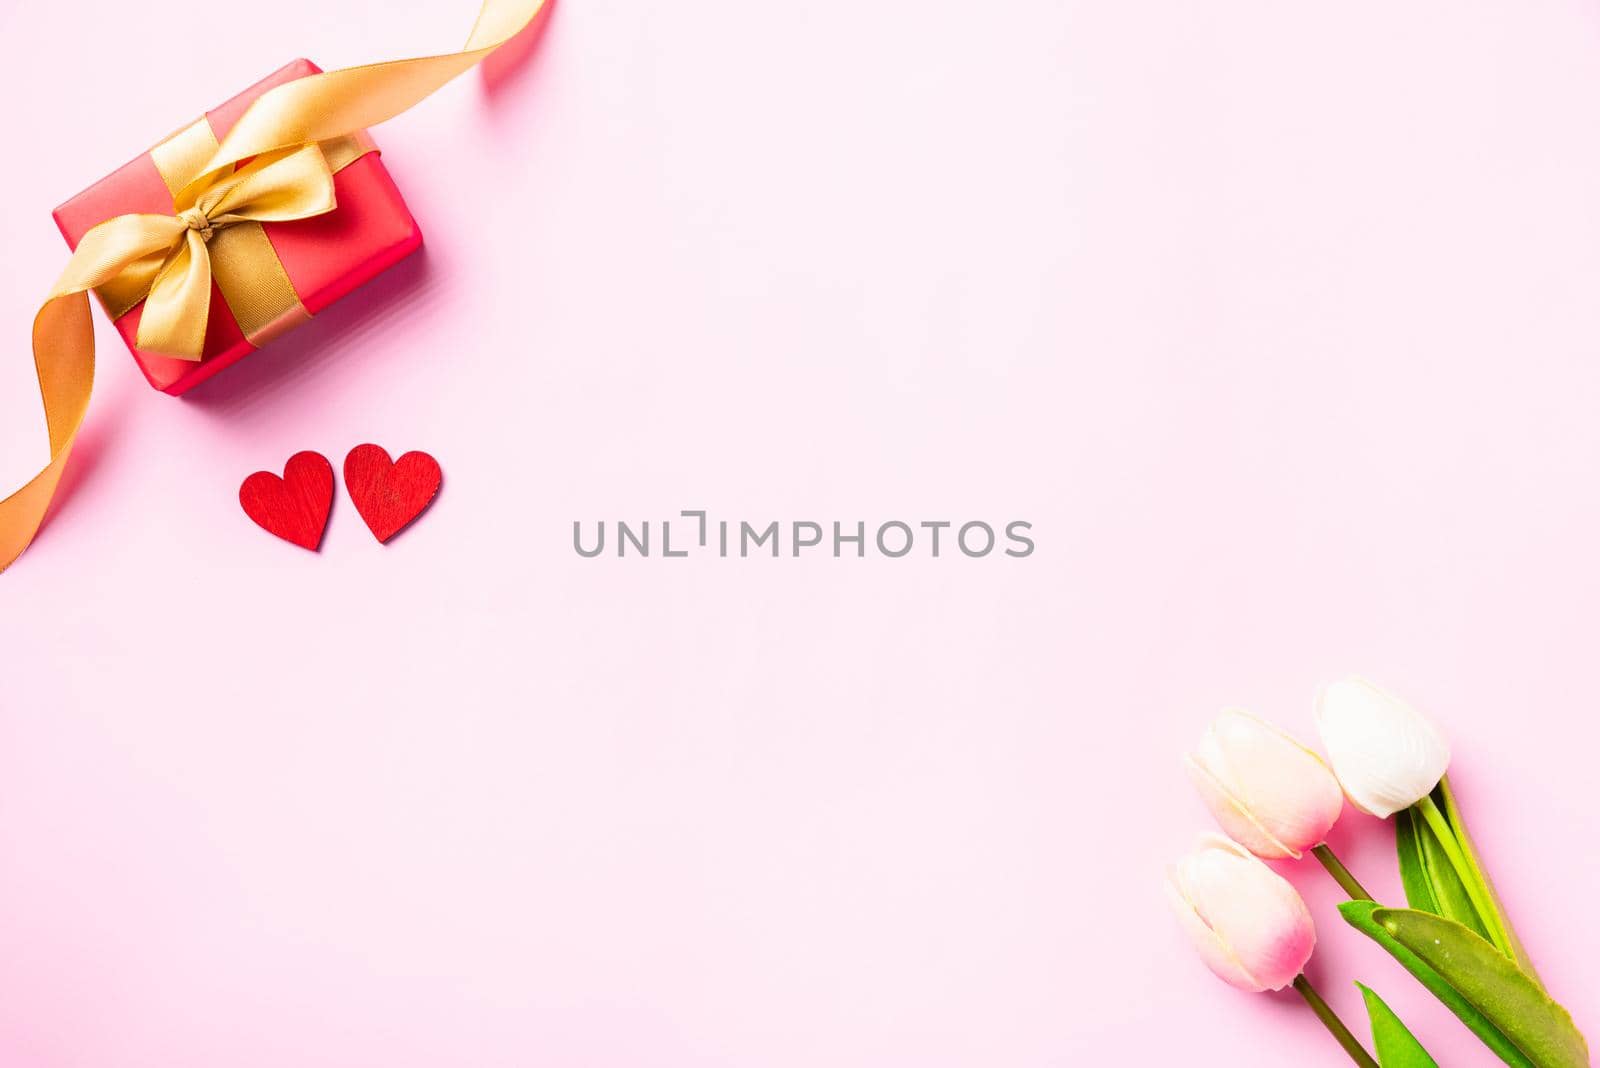 Happy Valentine's day composition background concept. Red gift box with a golden bow ribbon and wood red hearts for love isolated on pink background with copy space. Top View from above